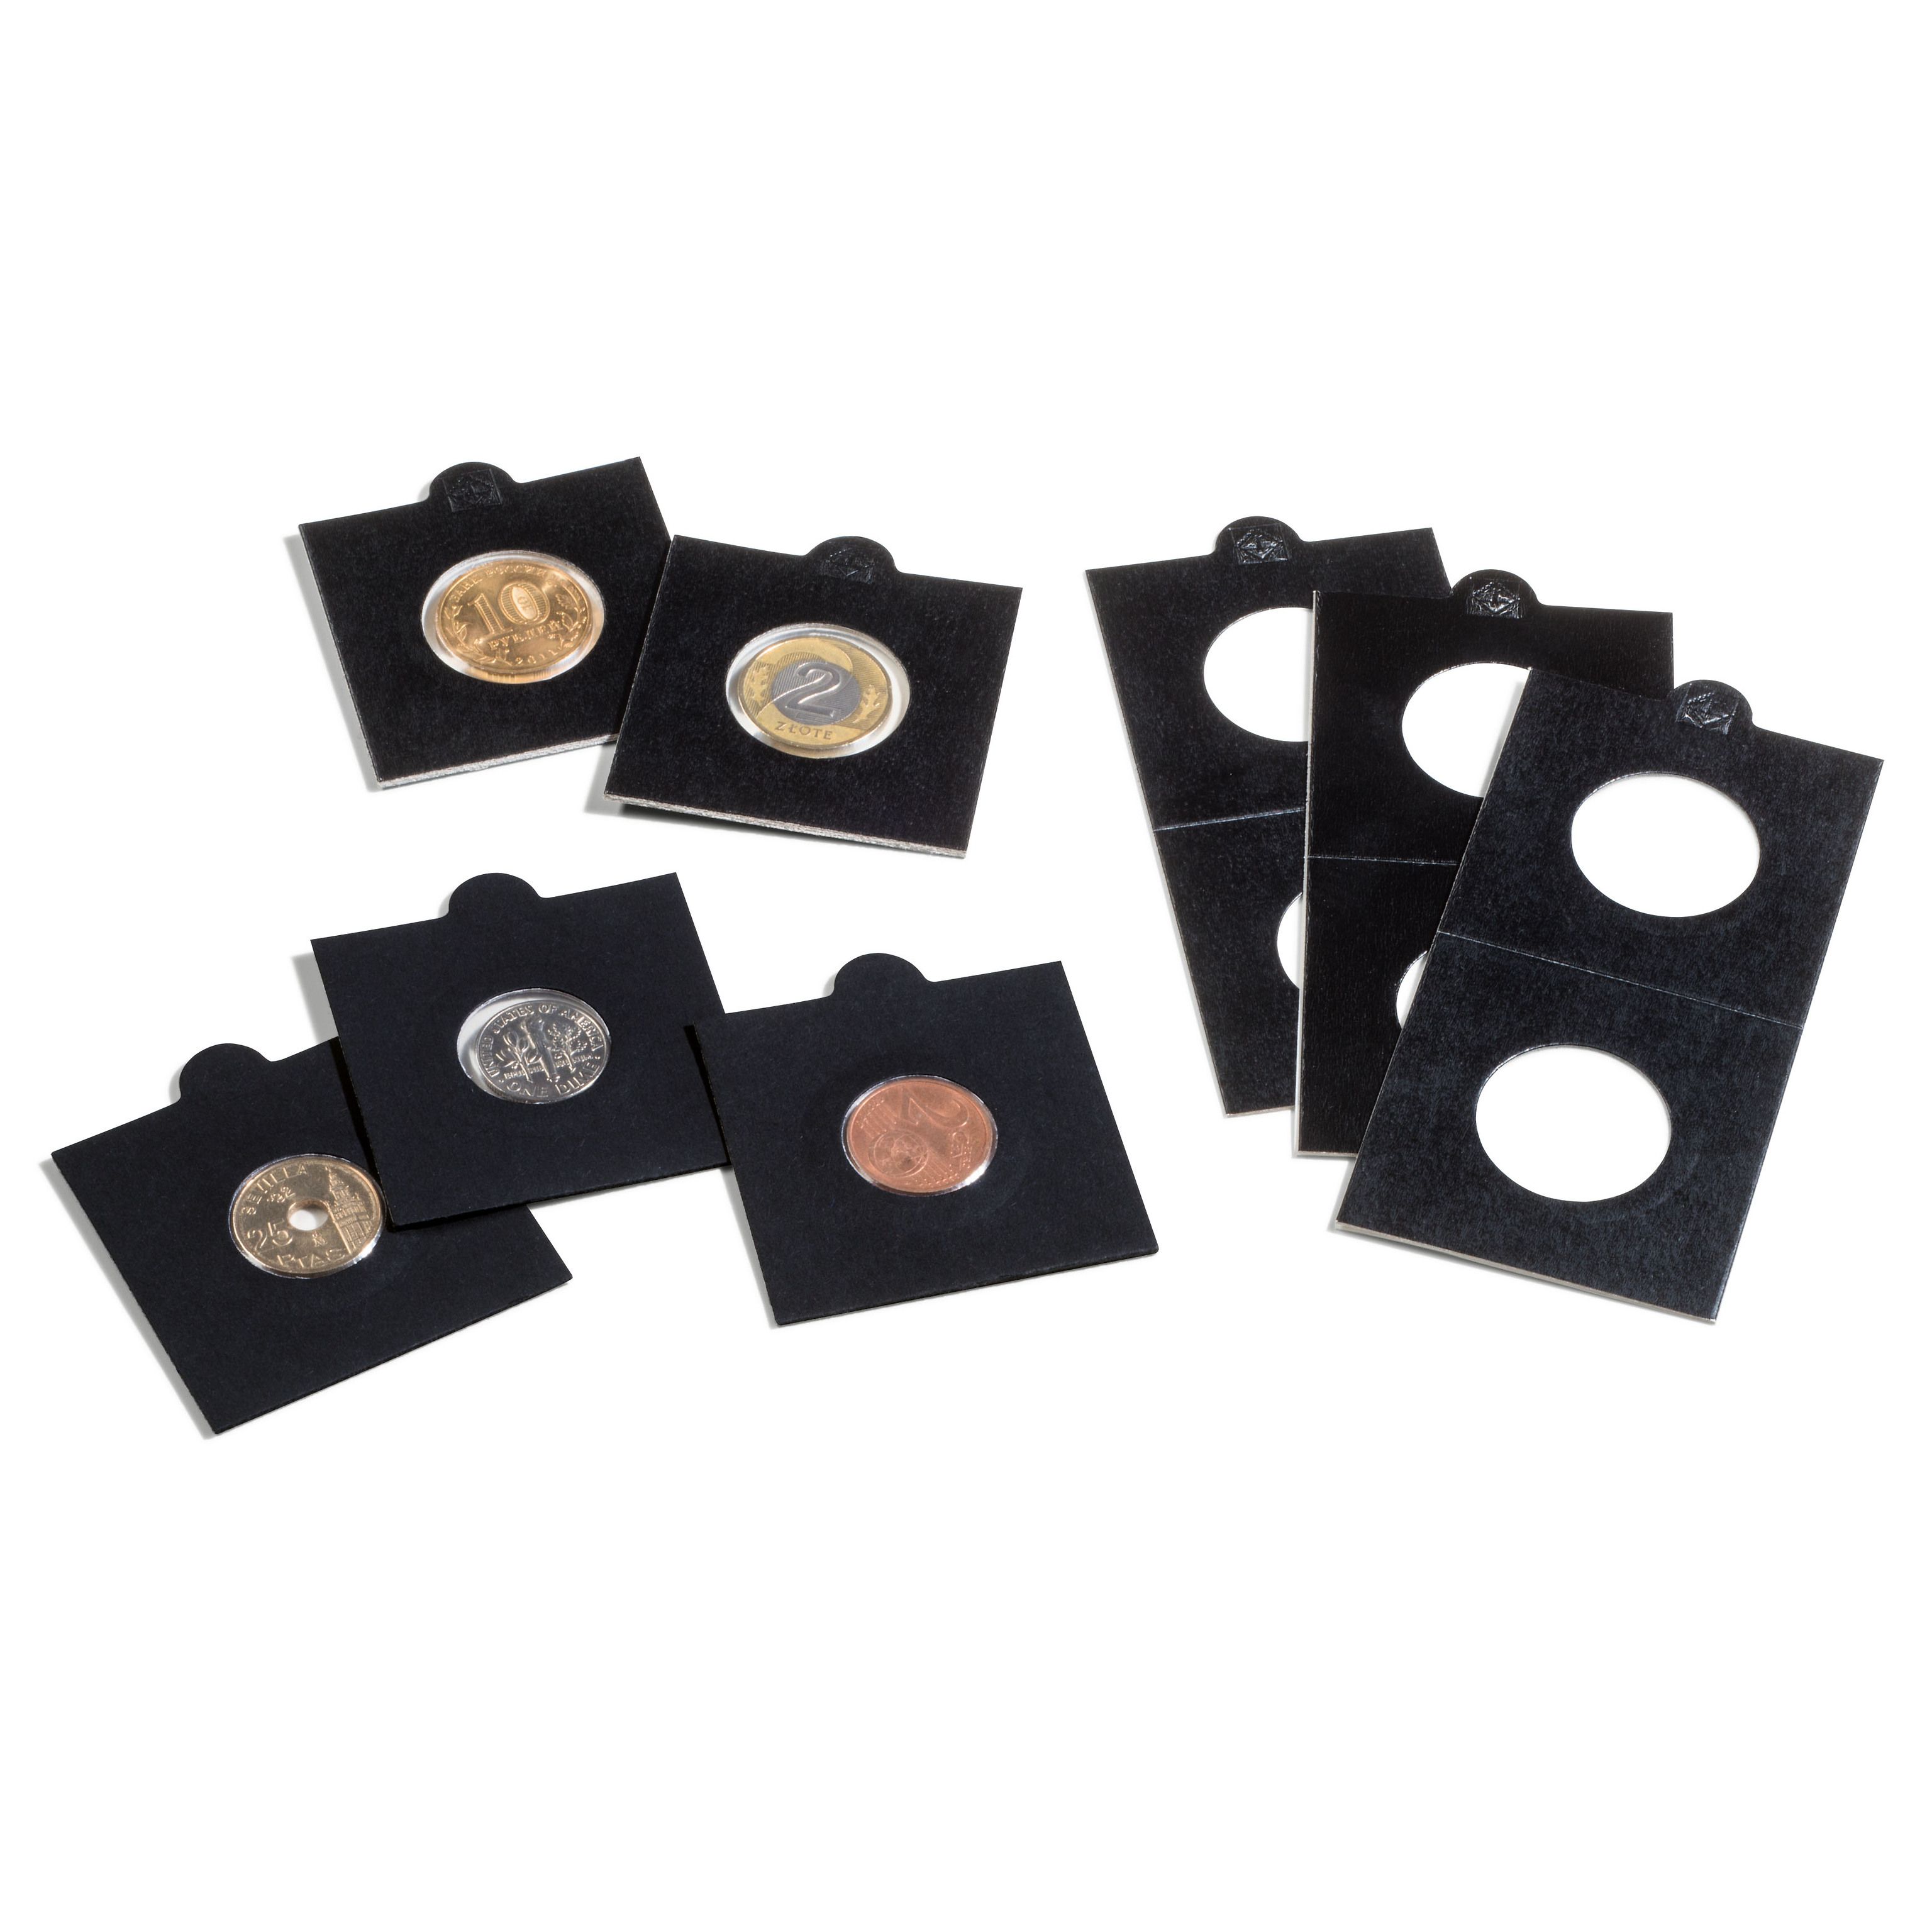 https://www.lighthouse.us/media/productdetail/3072x3072/800538/matrix-coin-holders-2x2-self-adhesive-black-pack-of-100.jpg